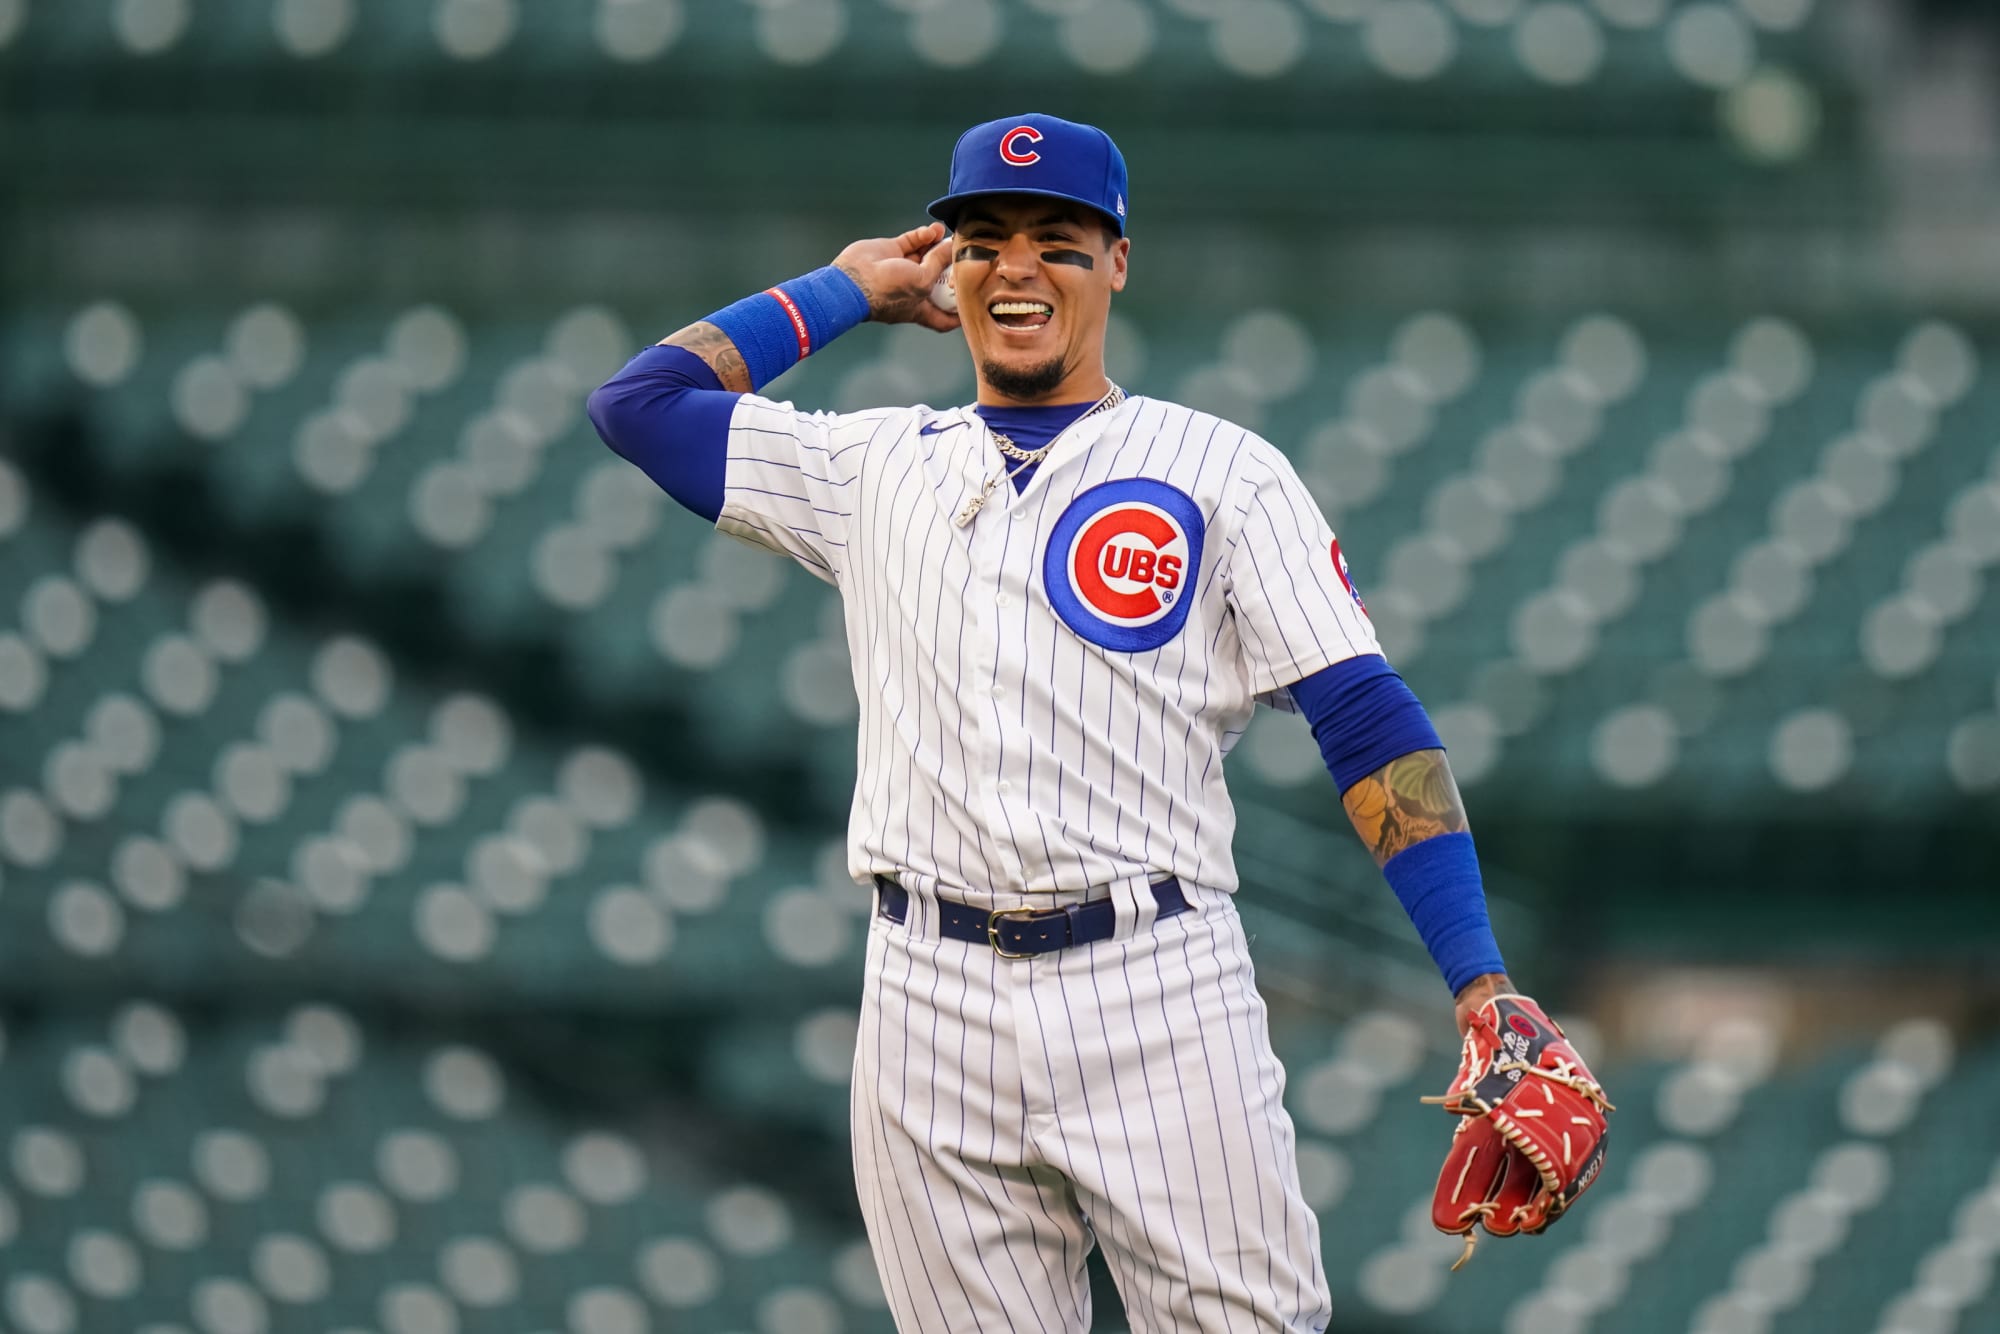 Javy Baez had an amazing slide into home Tuesday night. 